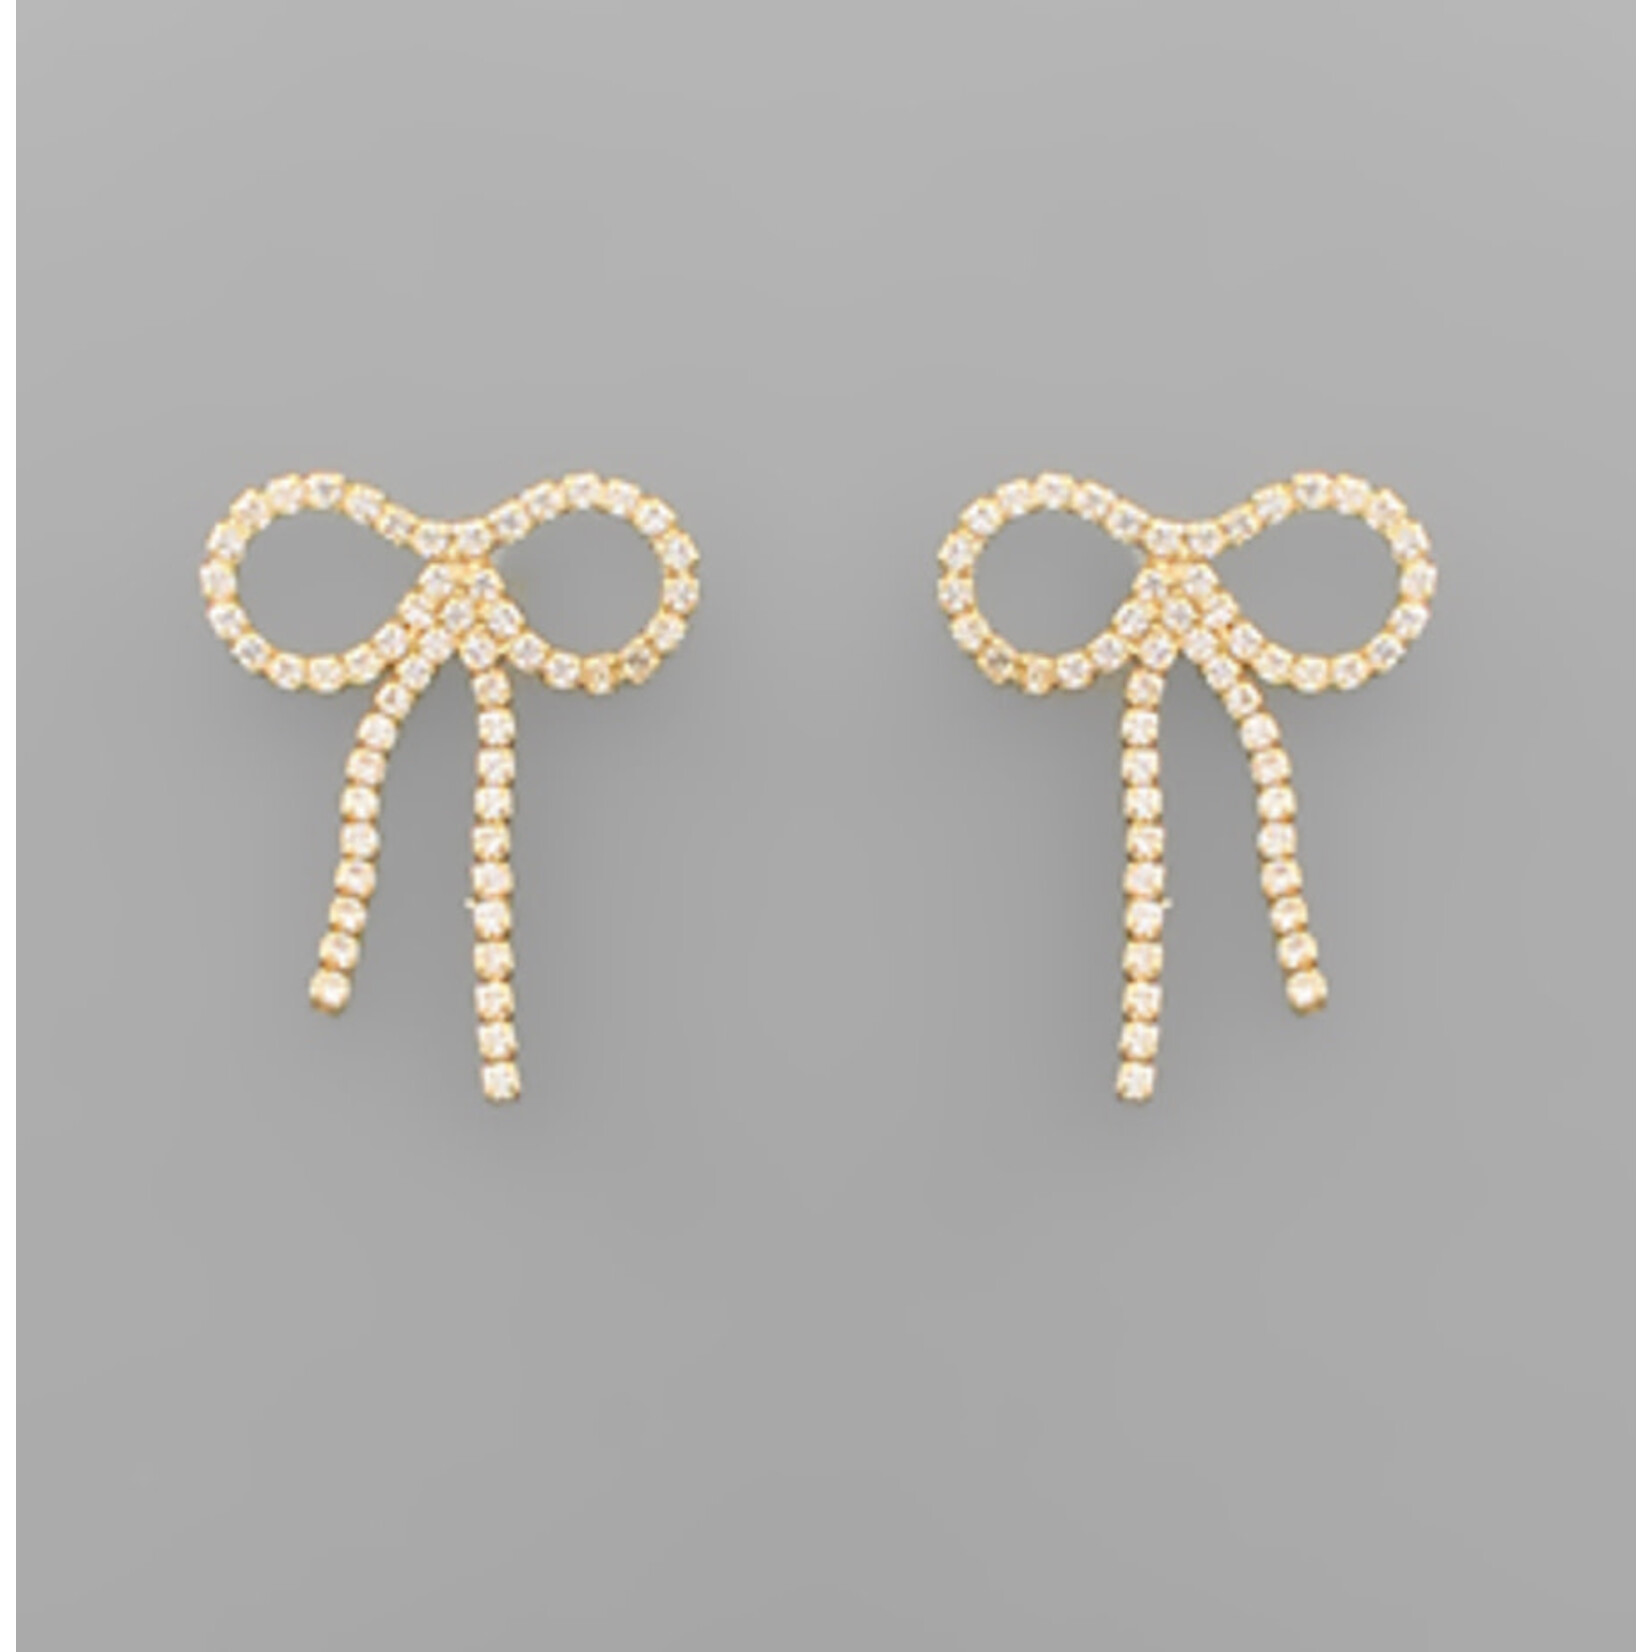 Pave Bow Earrings